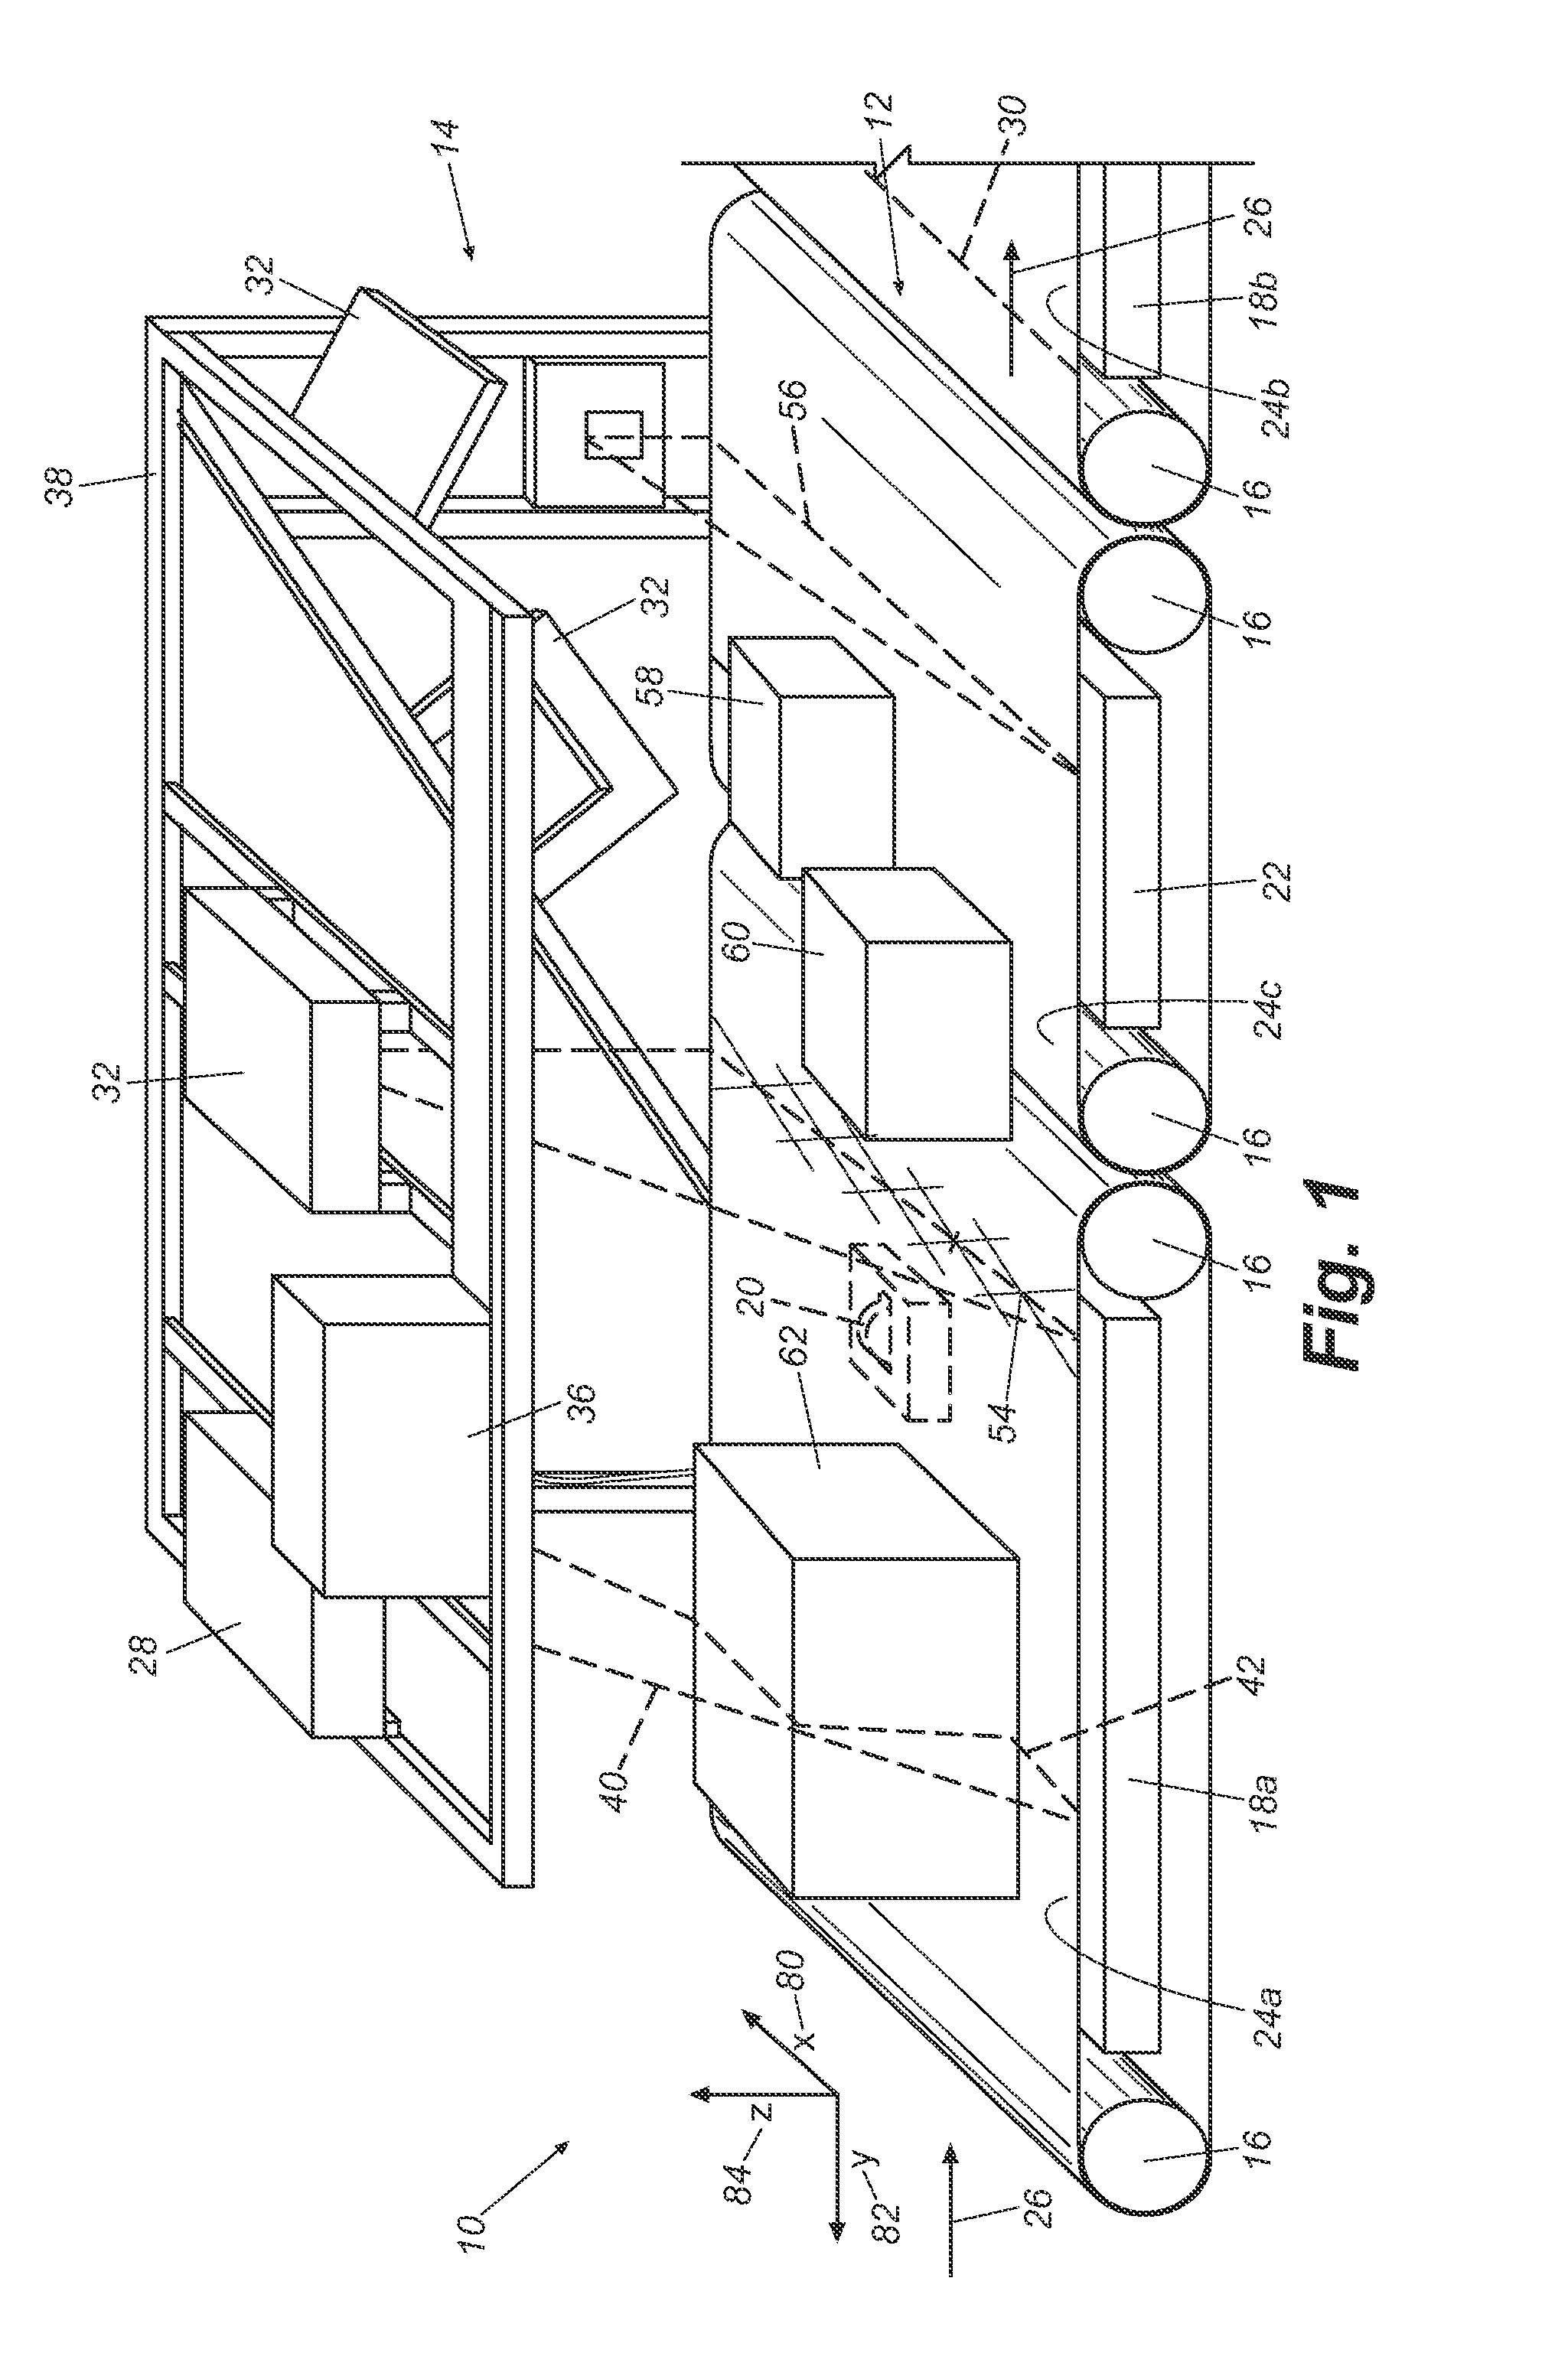 Apparatus and method for measuring the weight of items on a conveyor